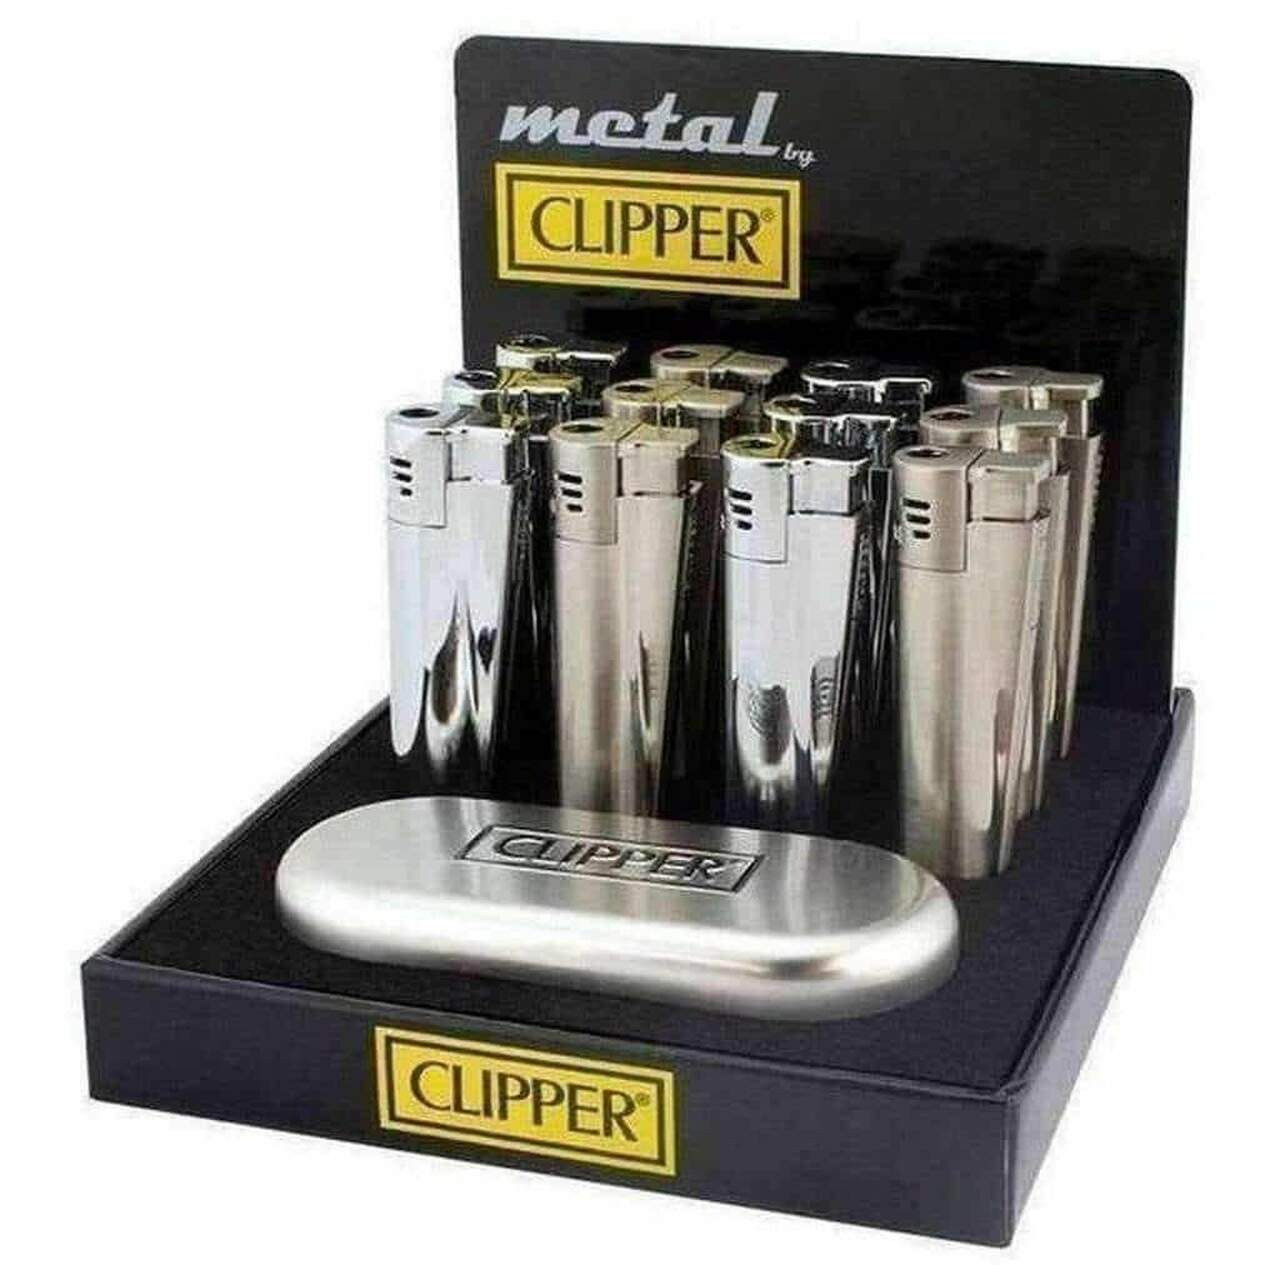 Clipper Metal Jet Flame Lighters - Silver Color - Beamer Smoke